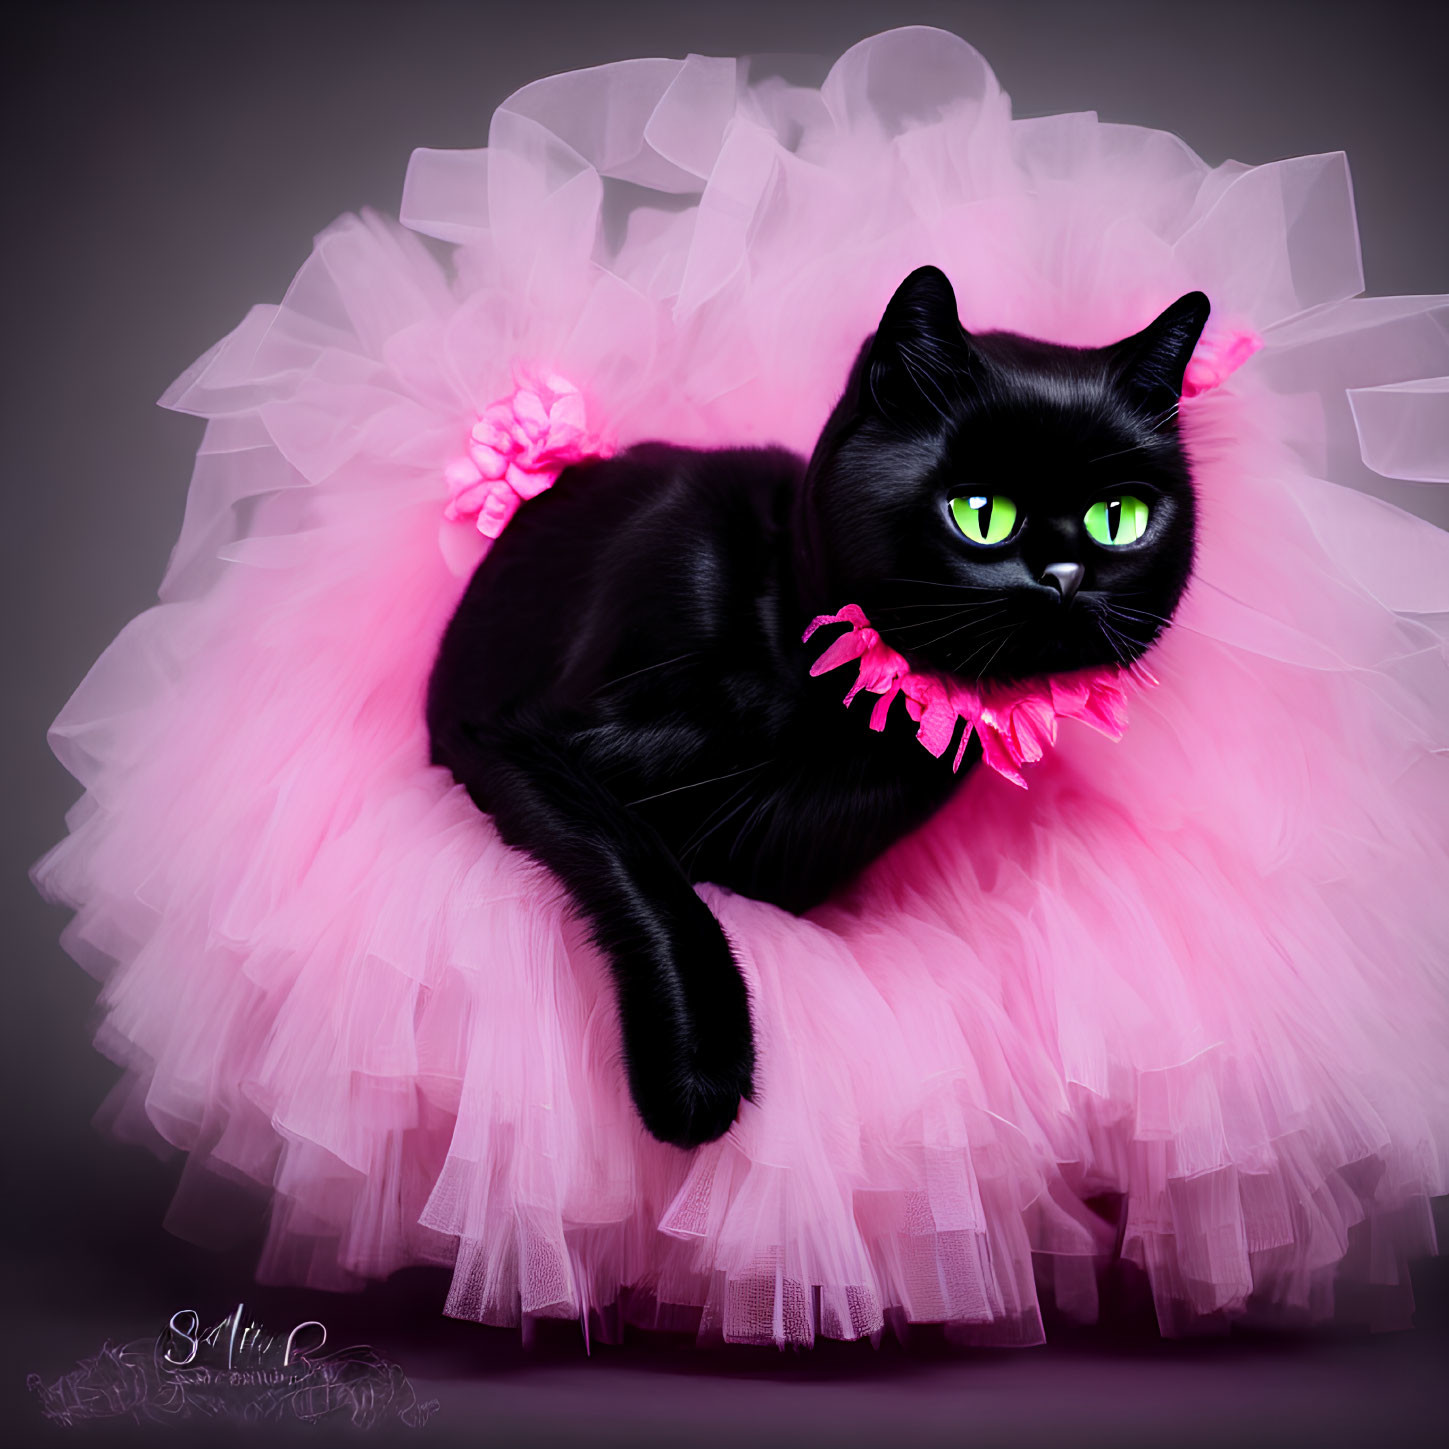 Black Cat with Green Eyes in Pink Tutu and Flower Collar on Dark Background